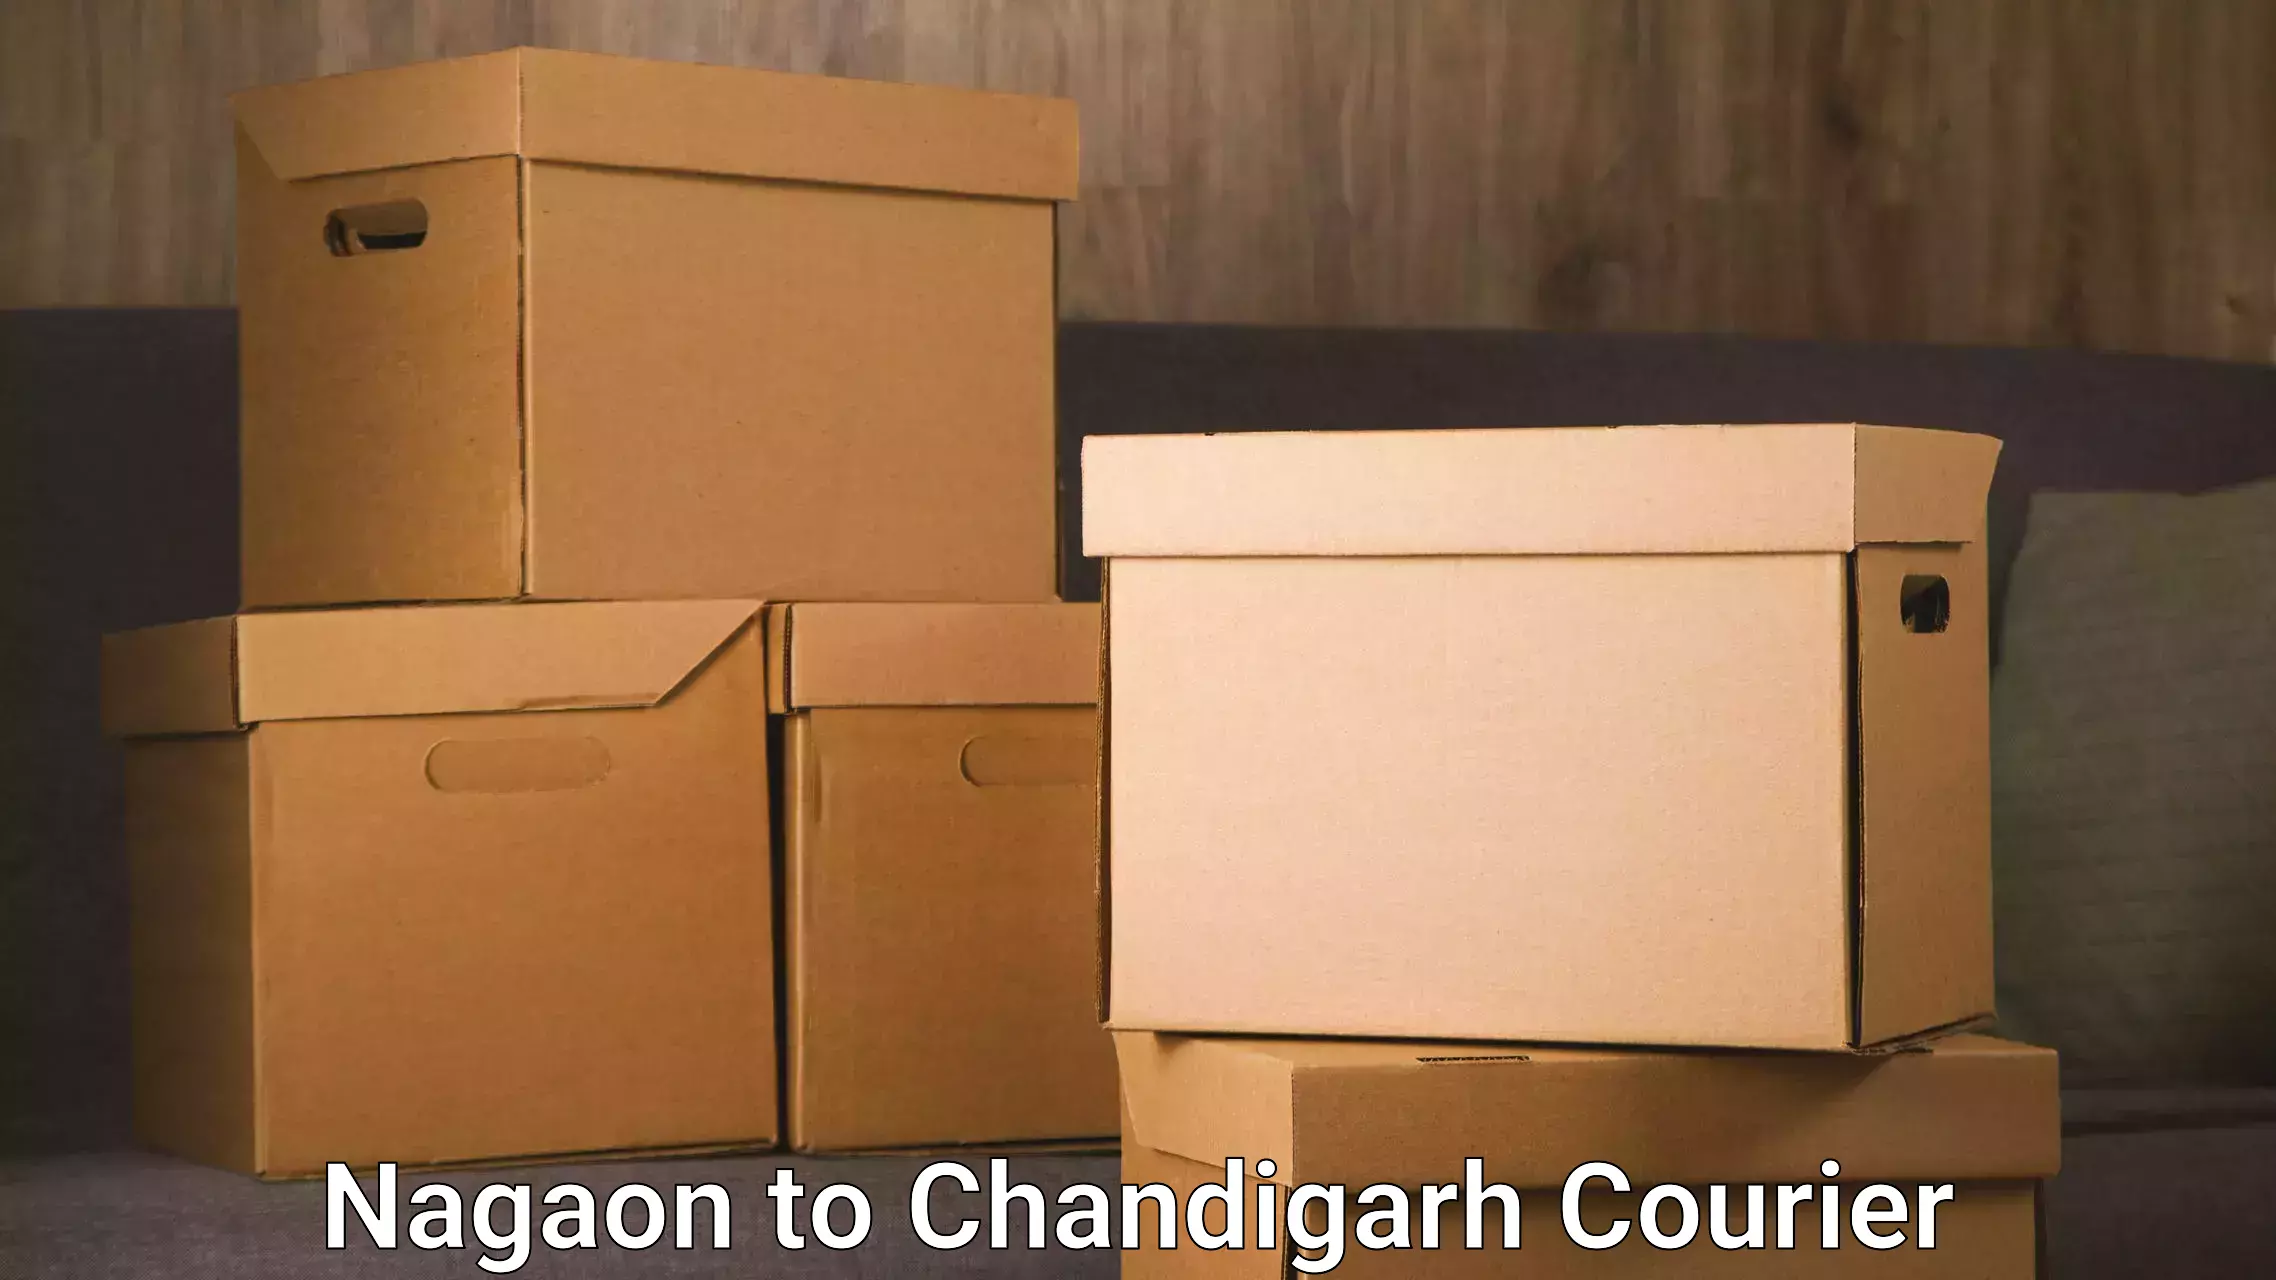 Express courier capabilities Nagaon to Chandigarh